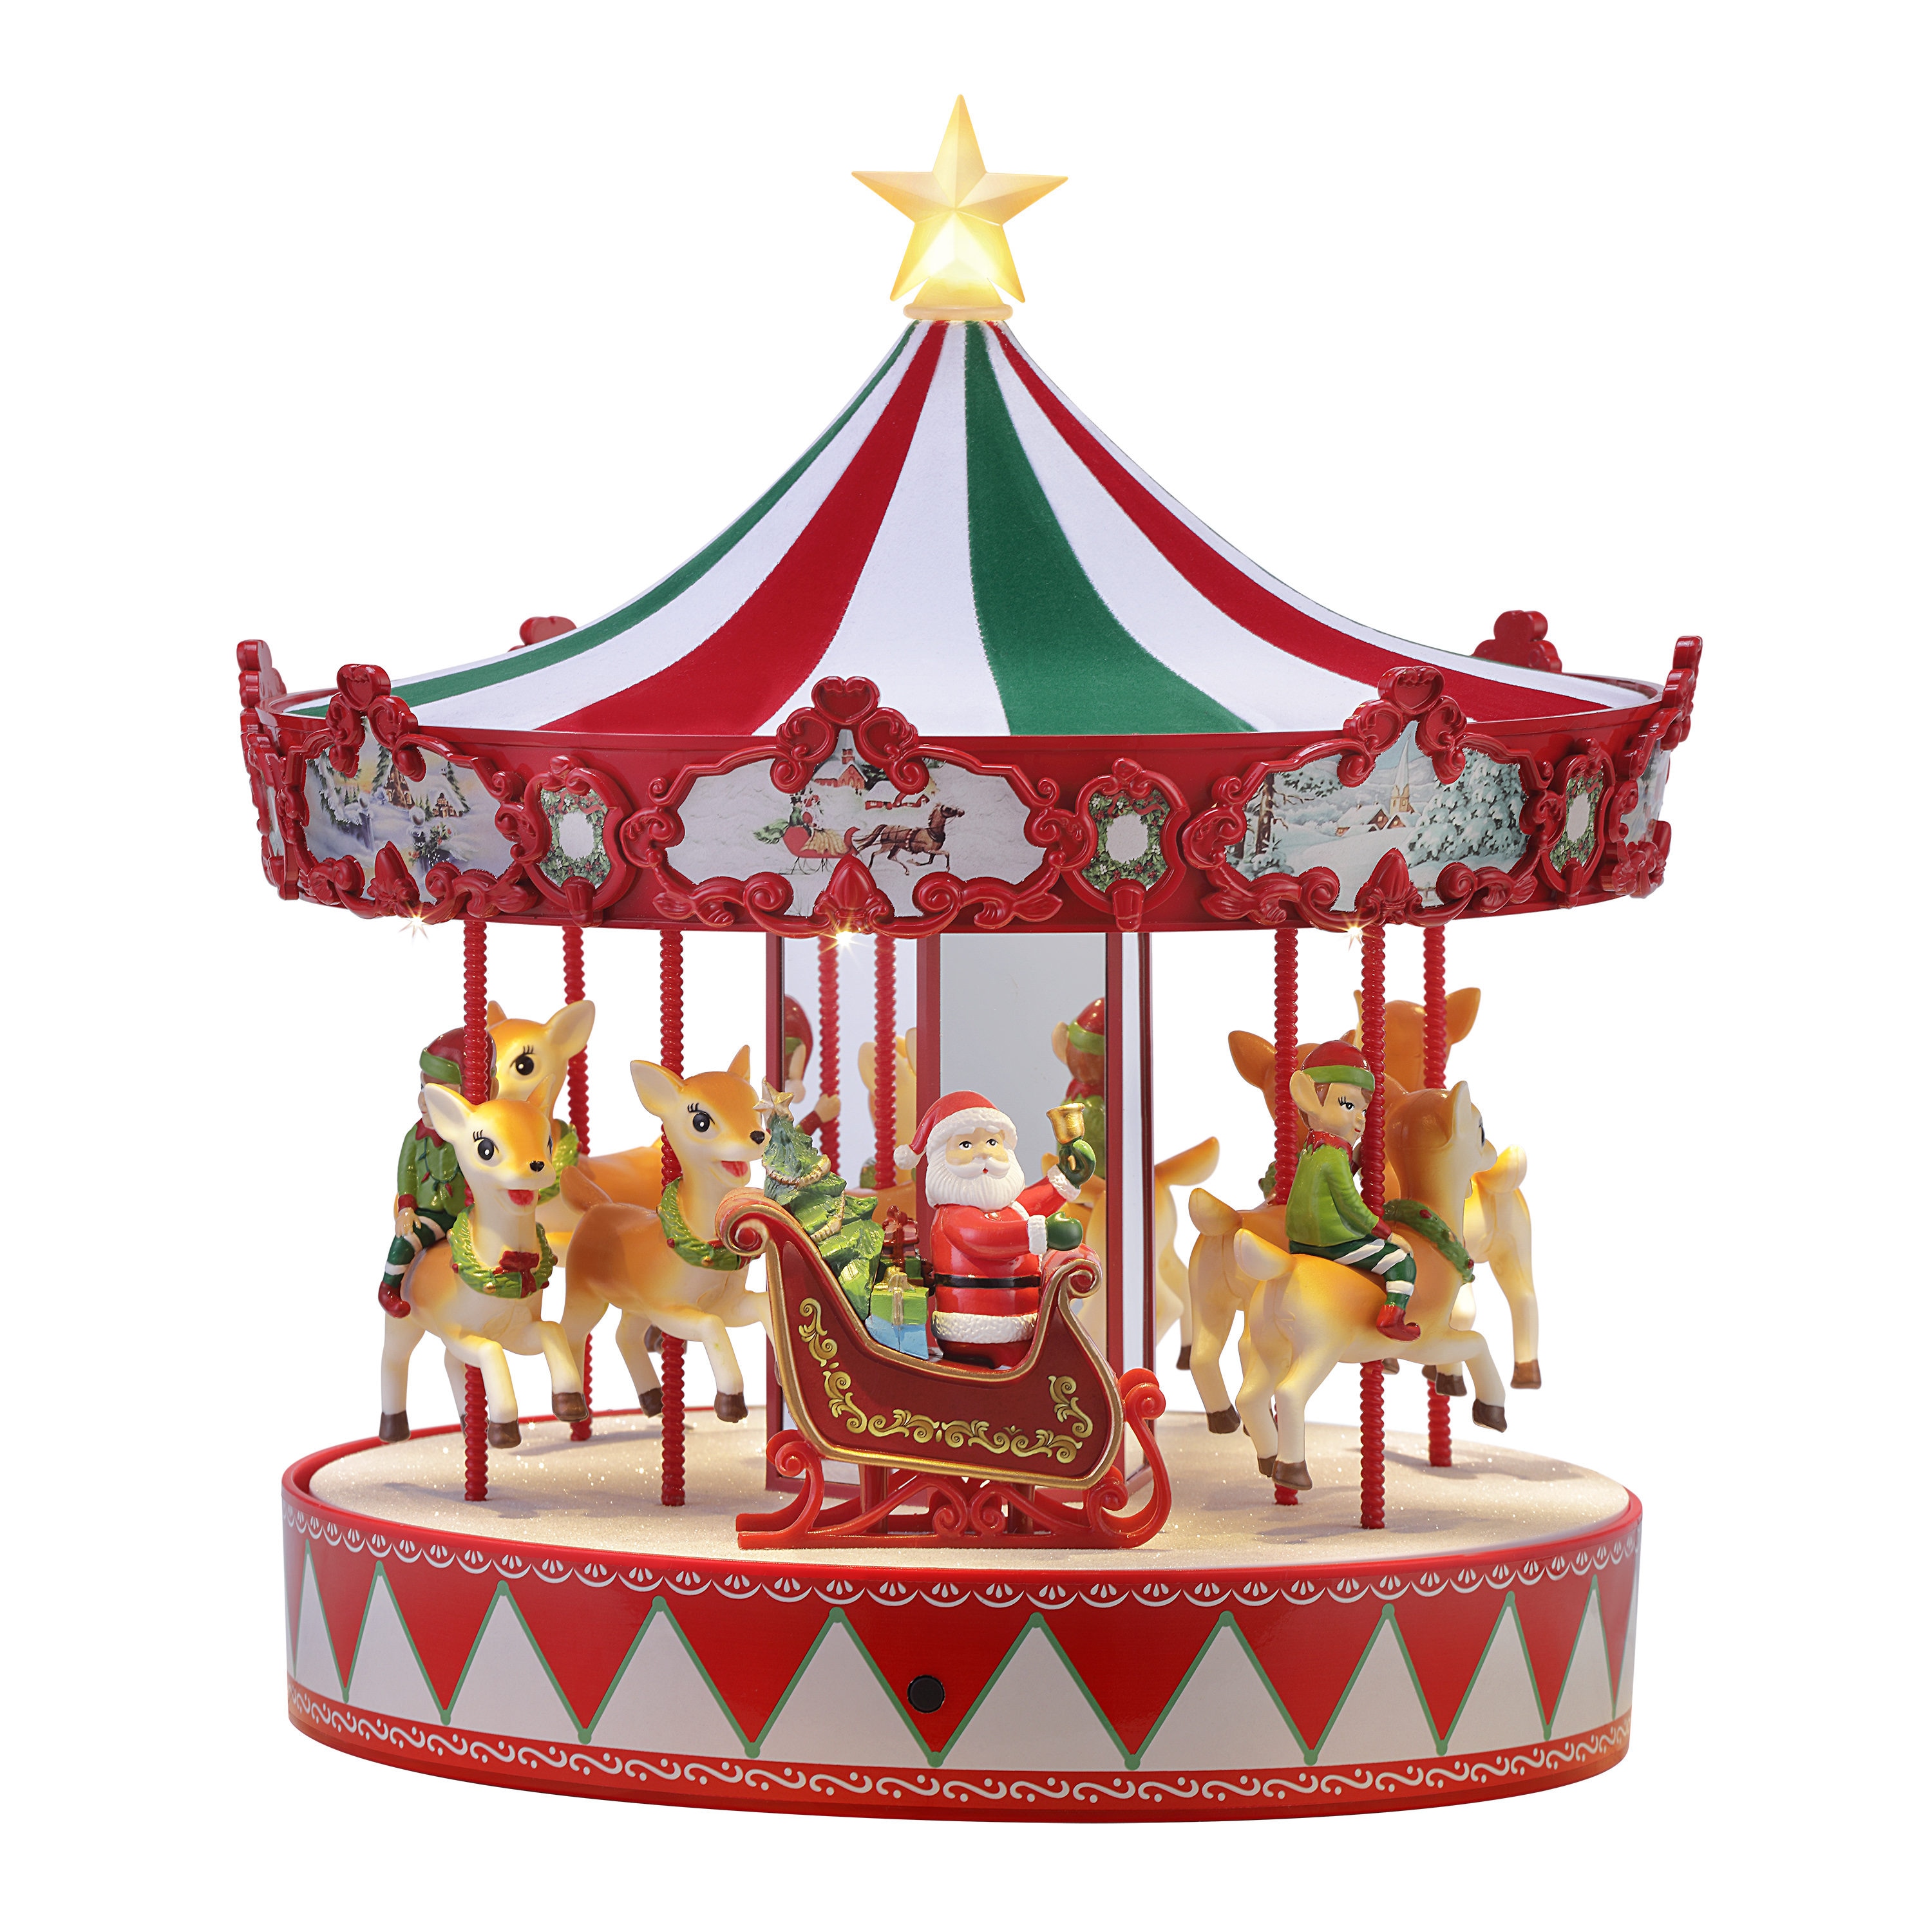 Mr. Christmas 13.5-in Lighted Musical Animatronic Decoration Carousel ...